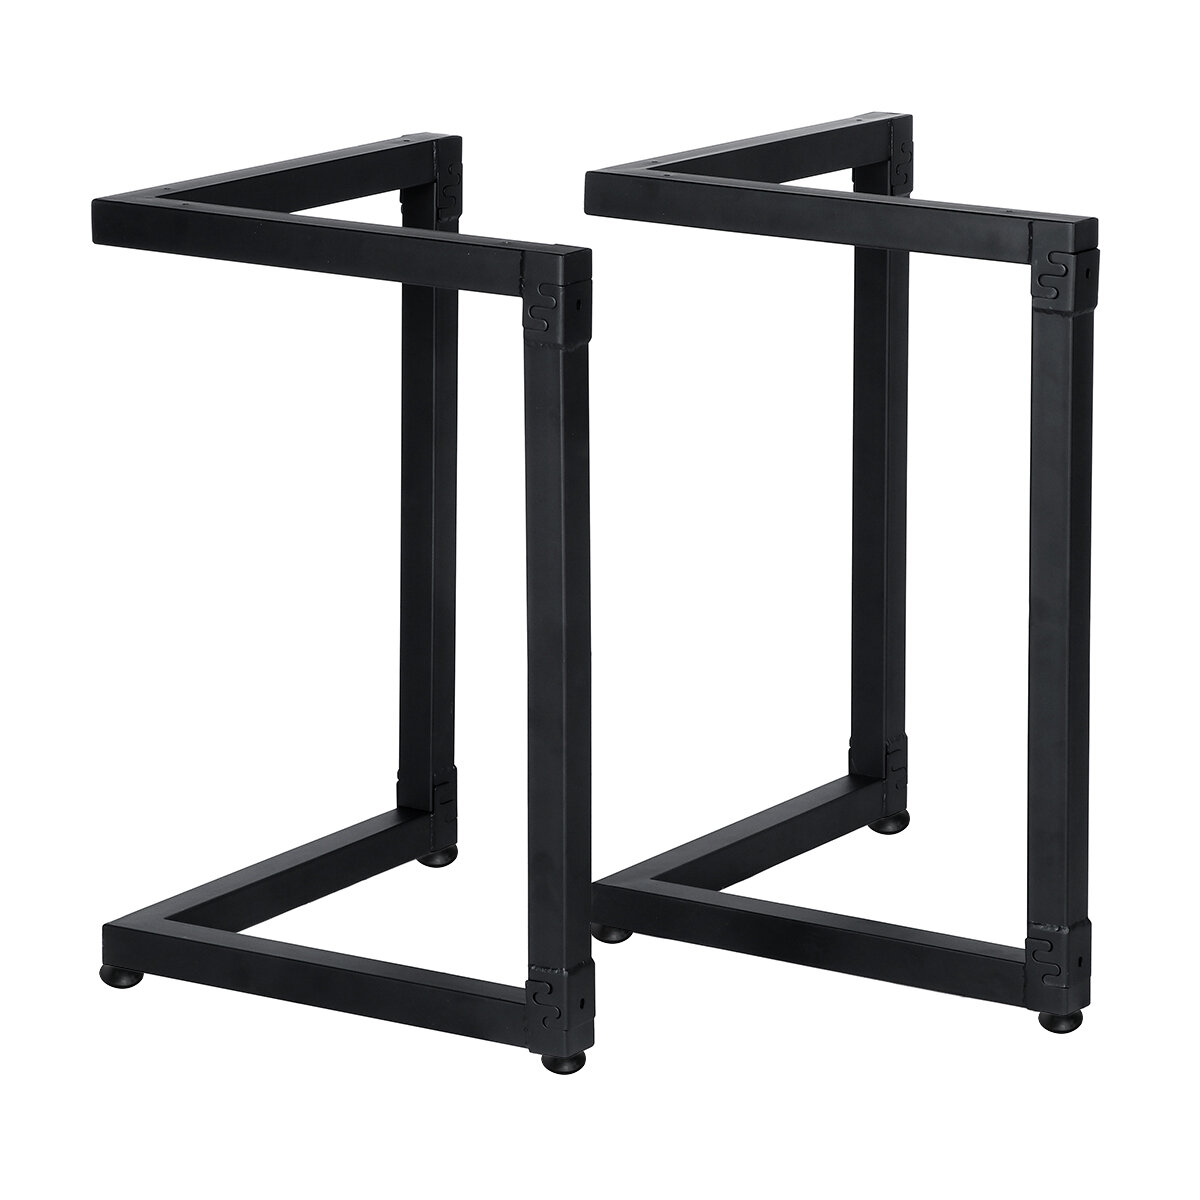 Image of 2Pcs V-shape Coffee Table Legs Industrial Metal Computer Laptop Desk Dining Table Steel Base Feet Home Office Furniture